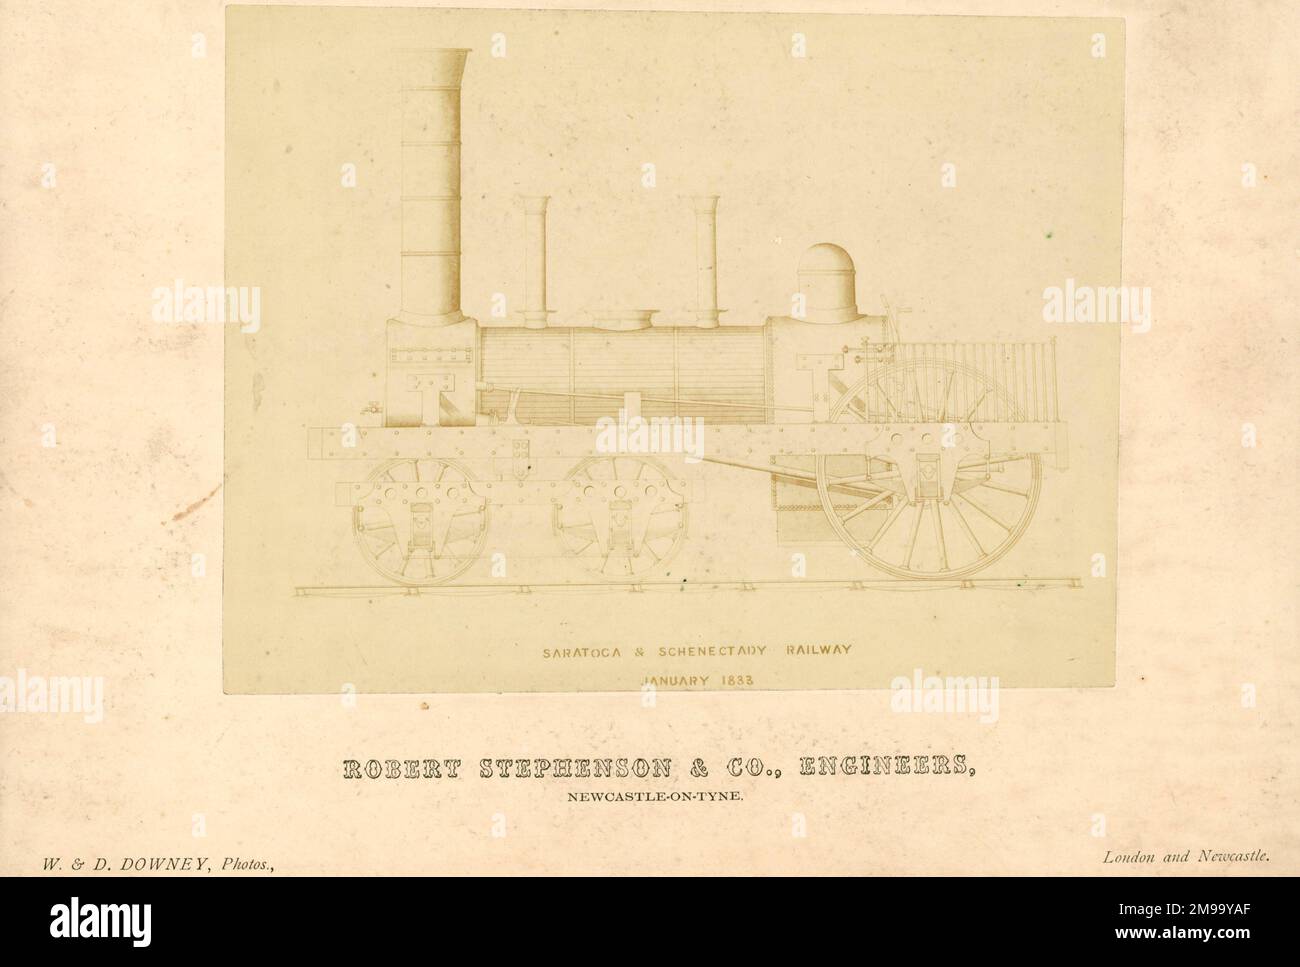 Locomotive by Robert Stephenson & Co, 1833. For the Saratoga & Schenectady Railroad. Stock Photo